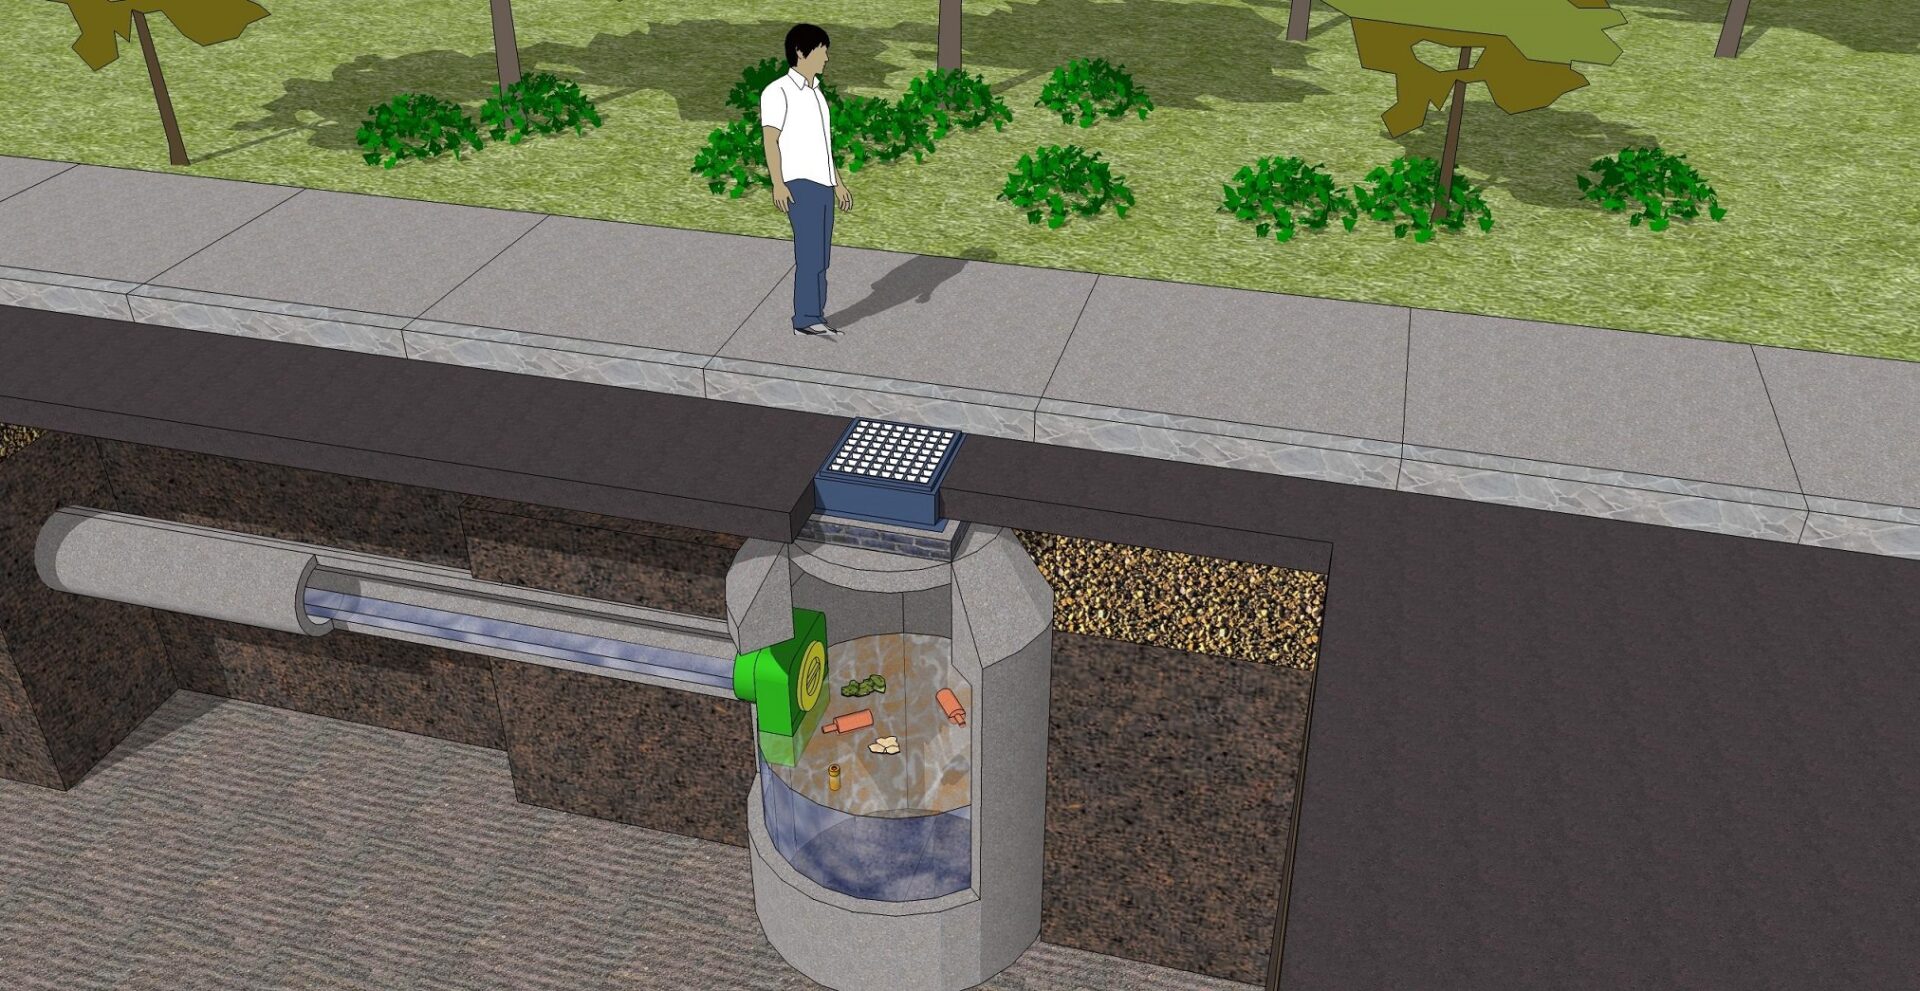 A graphic of a person walking on the street and an eliminator below the ground